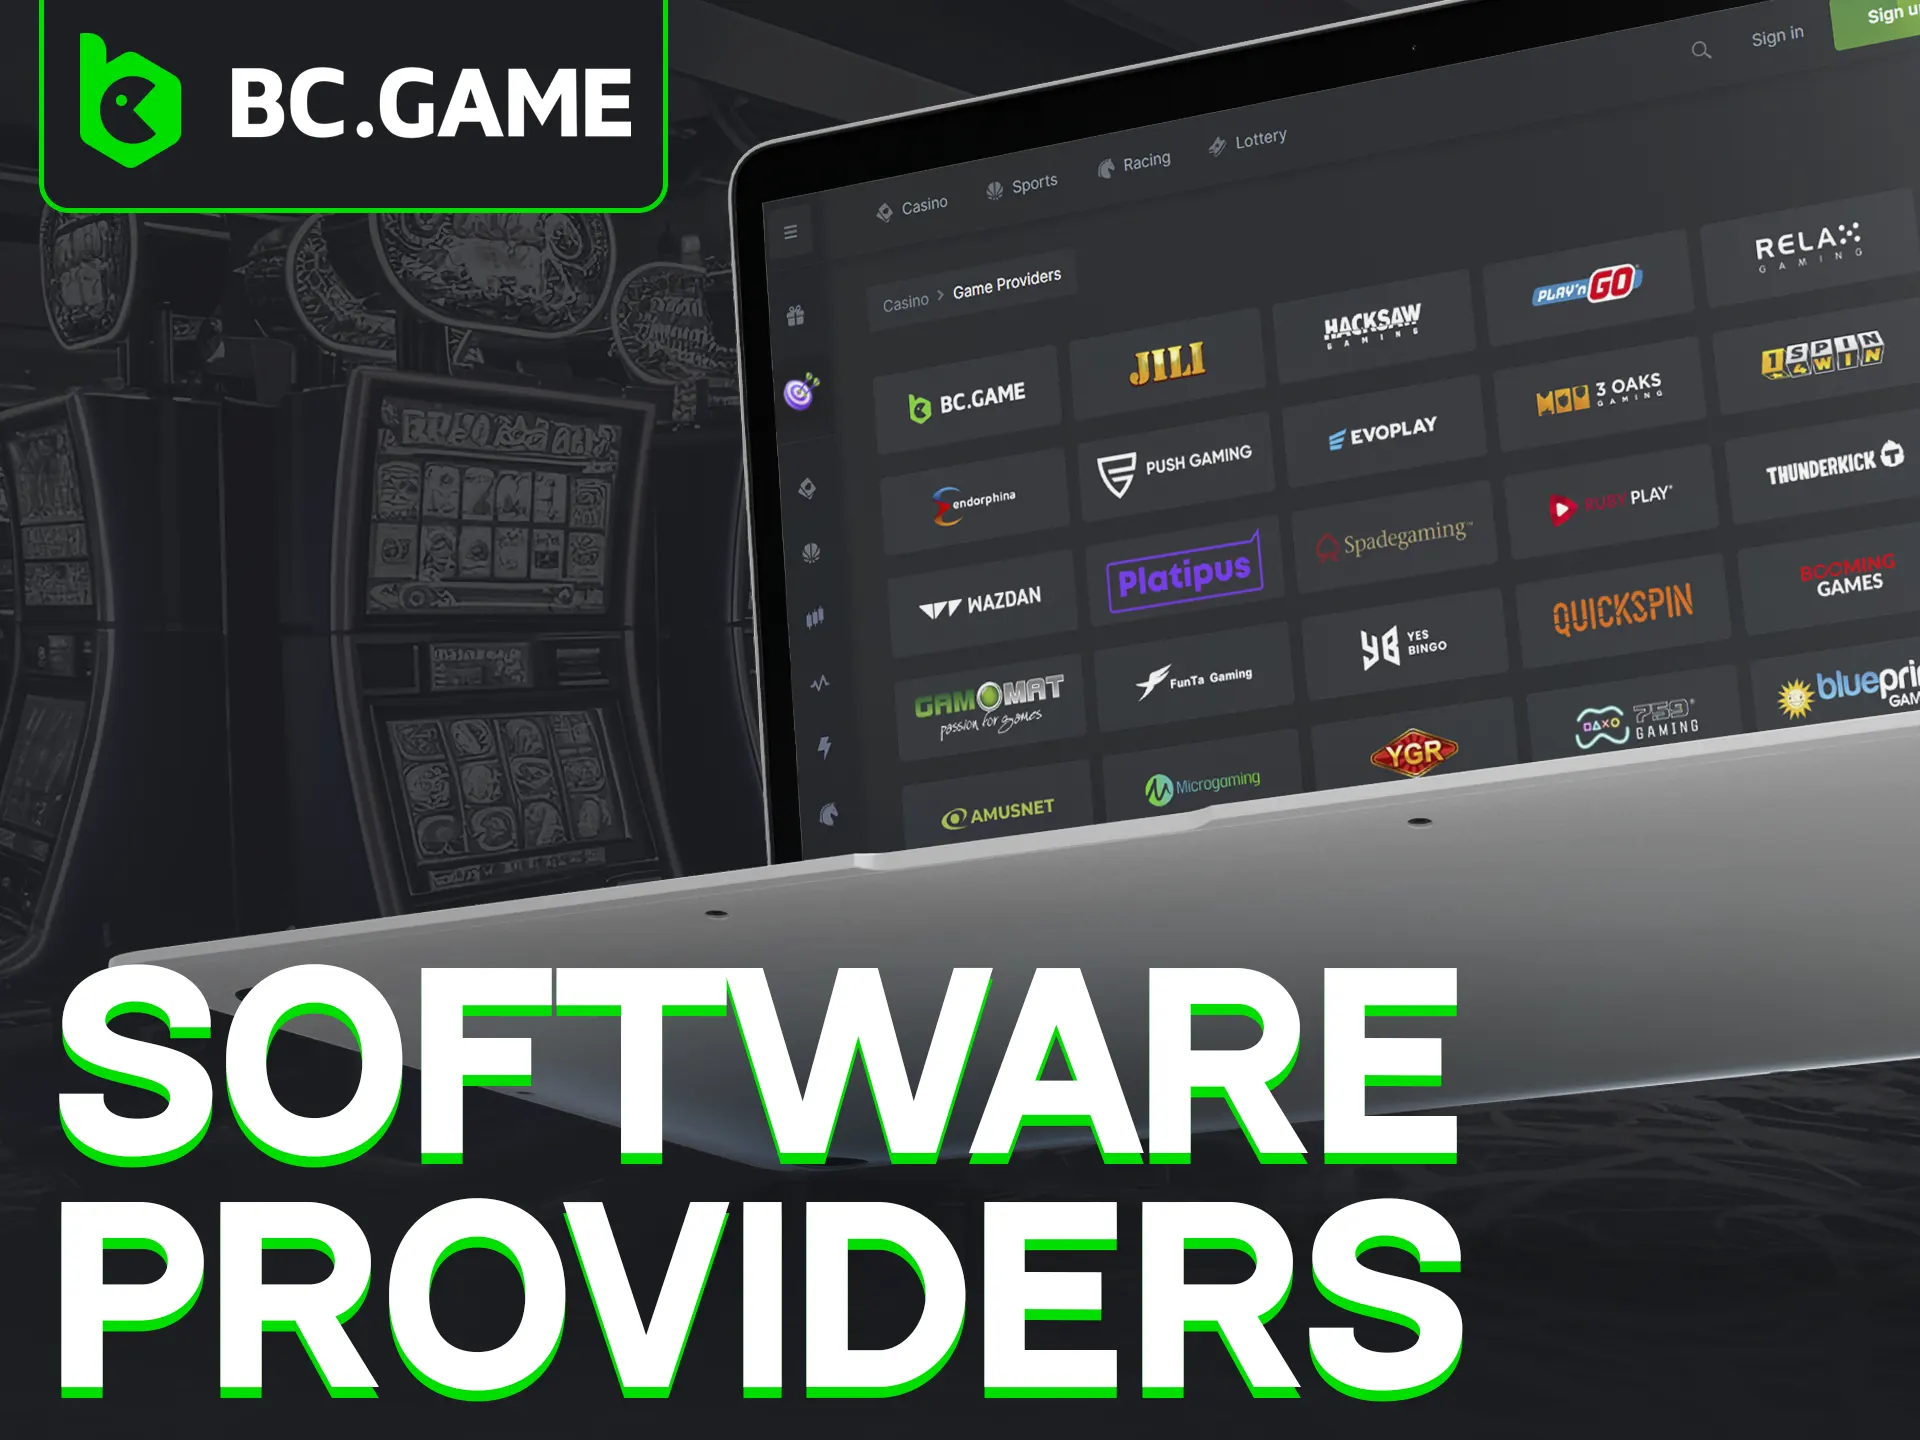 BC Game collaborates with various providers for diverse games.